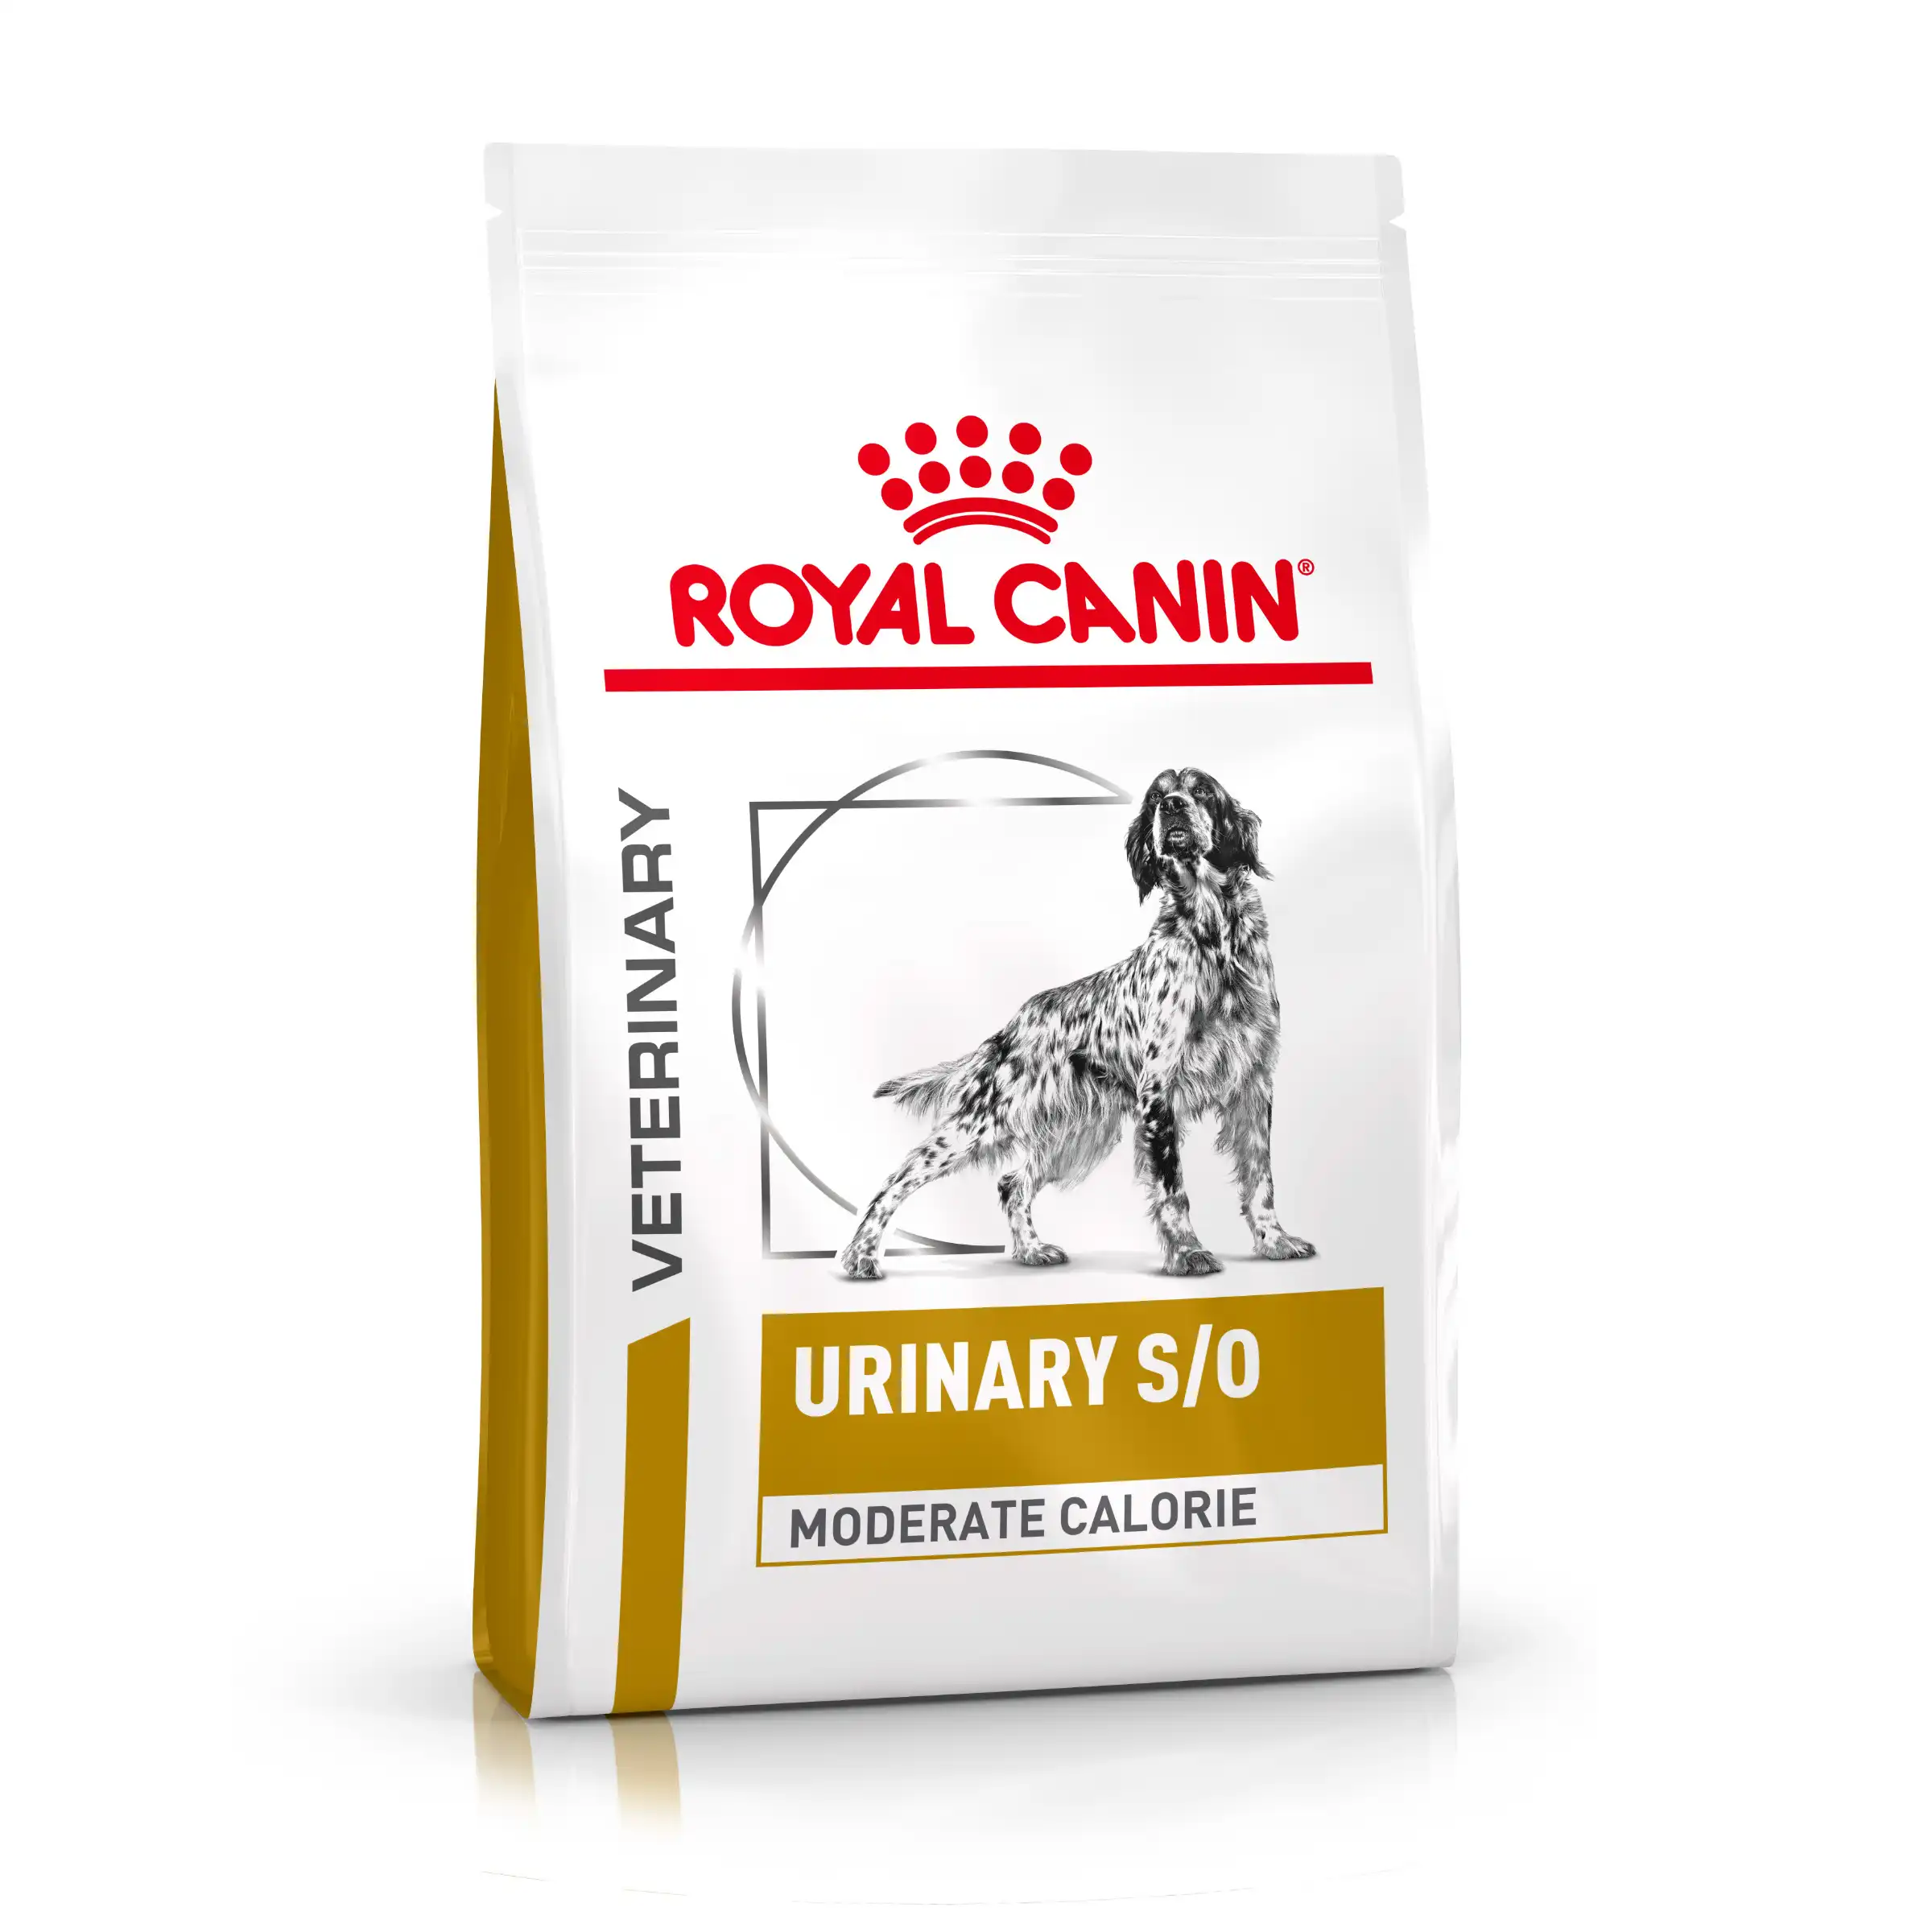 Royal Canin Urinary S/O Moderate Calorie 12 Kg.